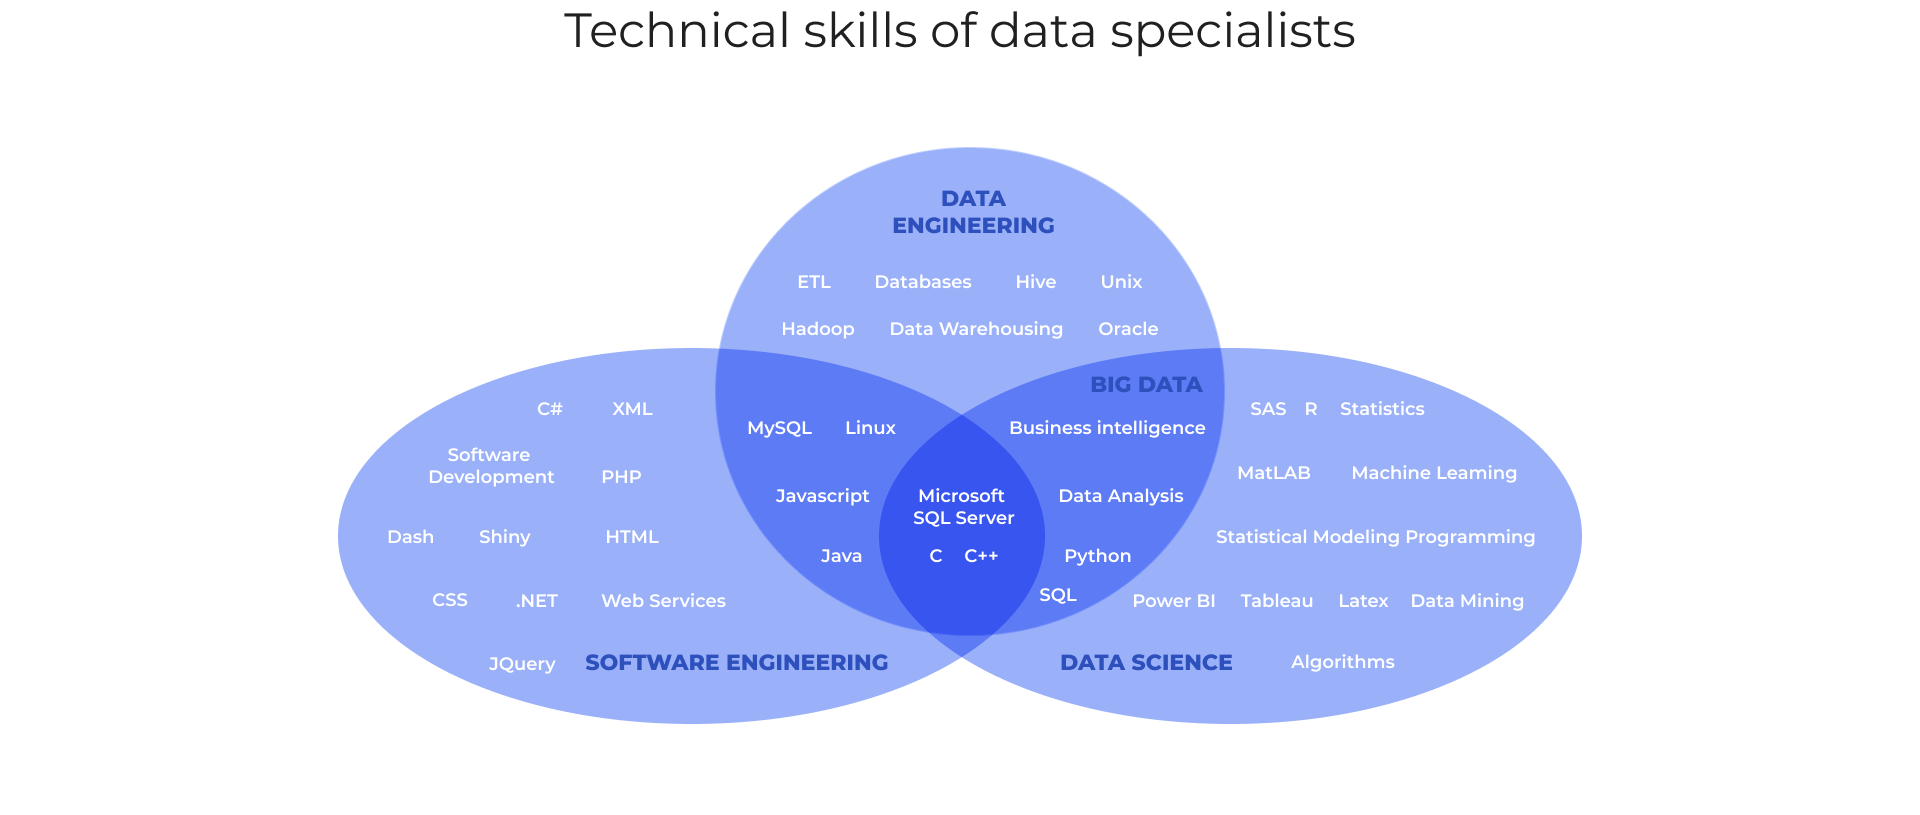 Technical skills of data specialists